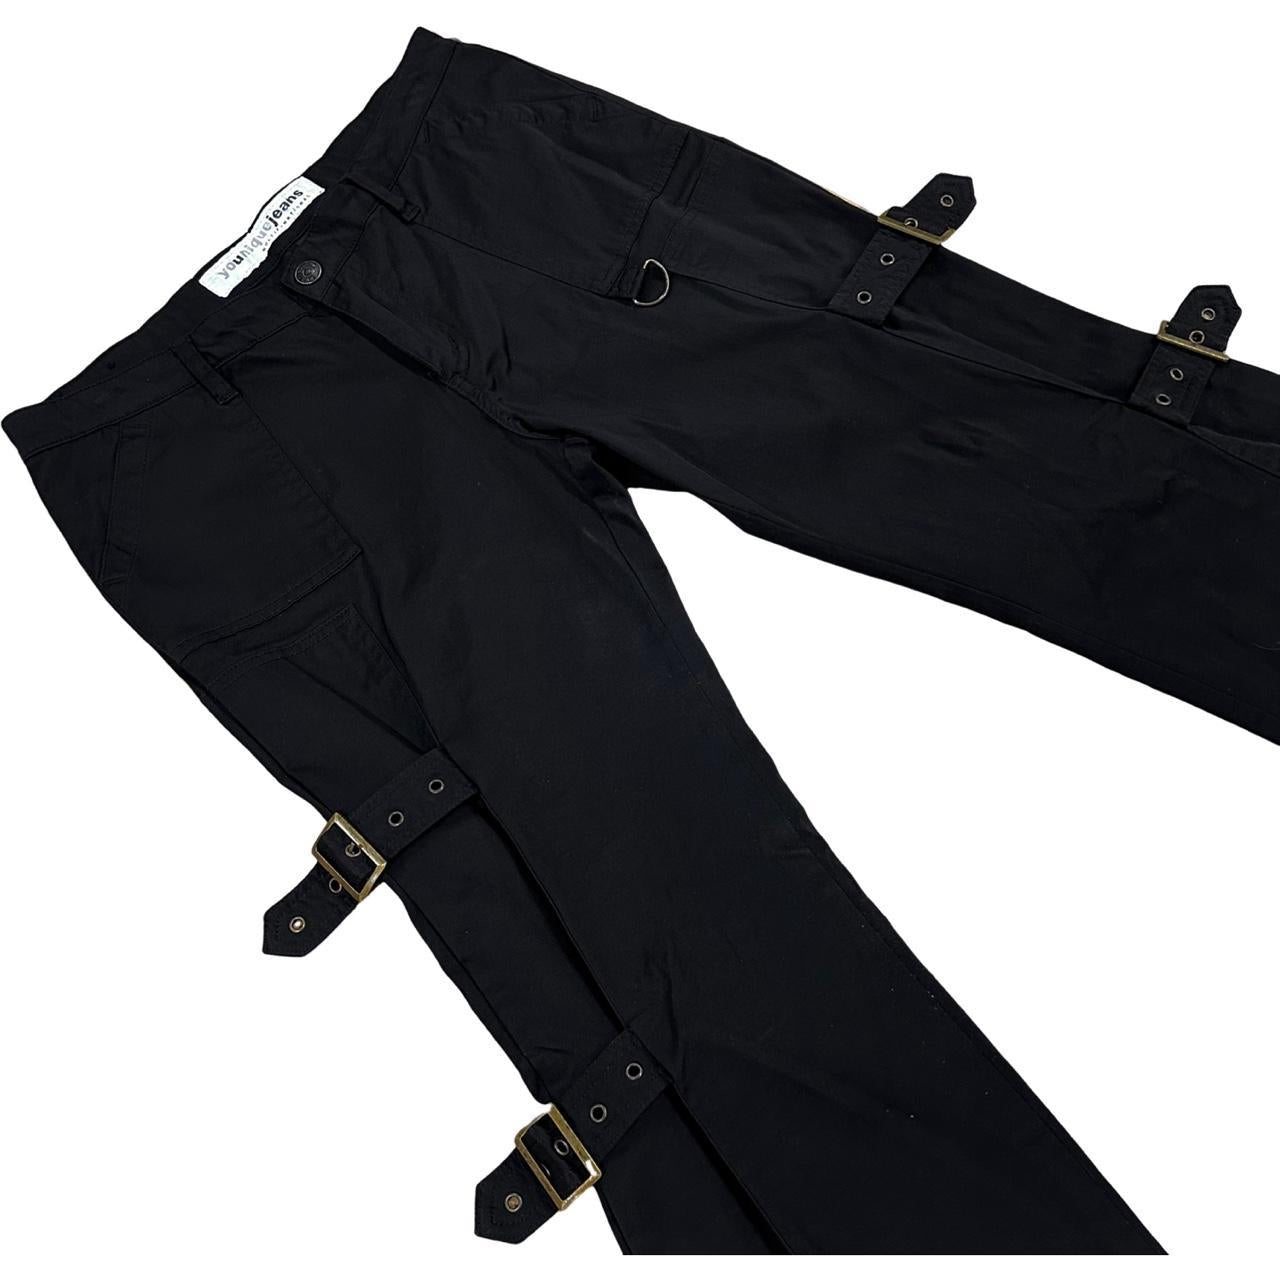 Buckle Flared Trousers